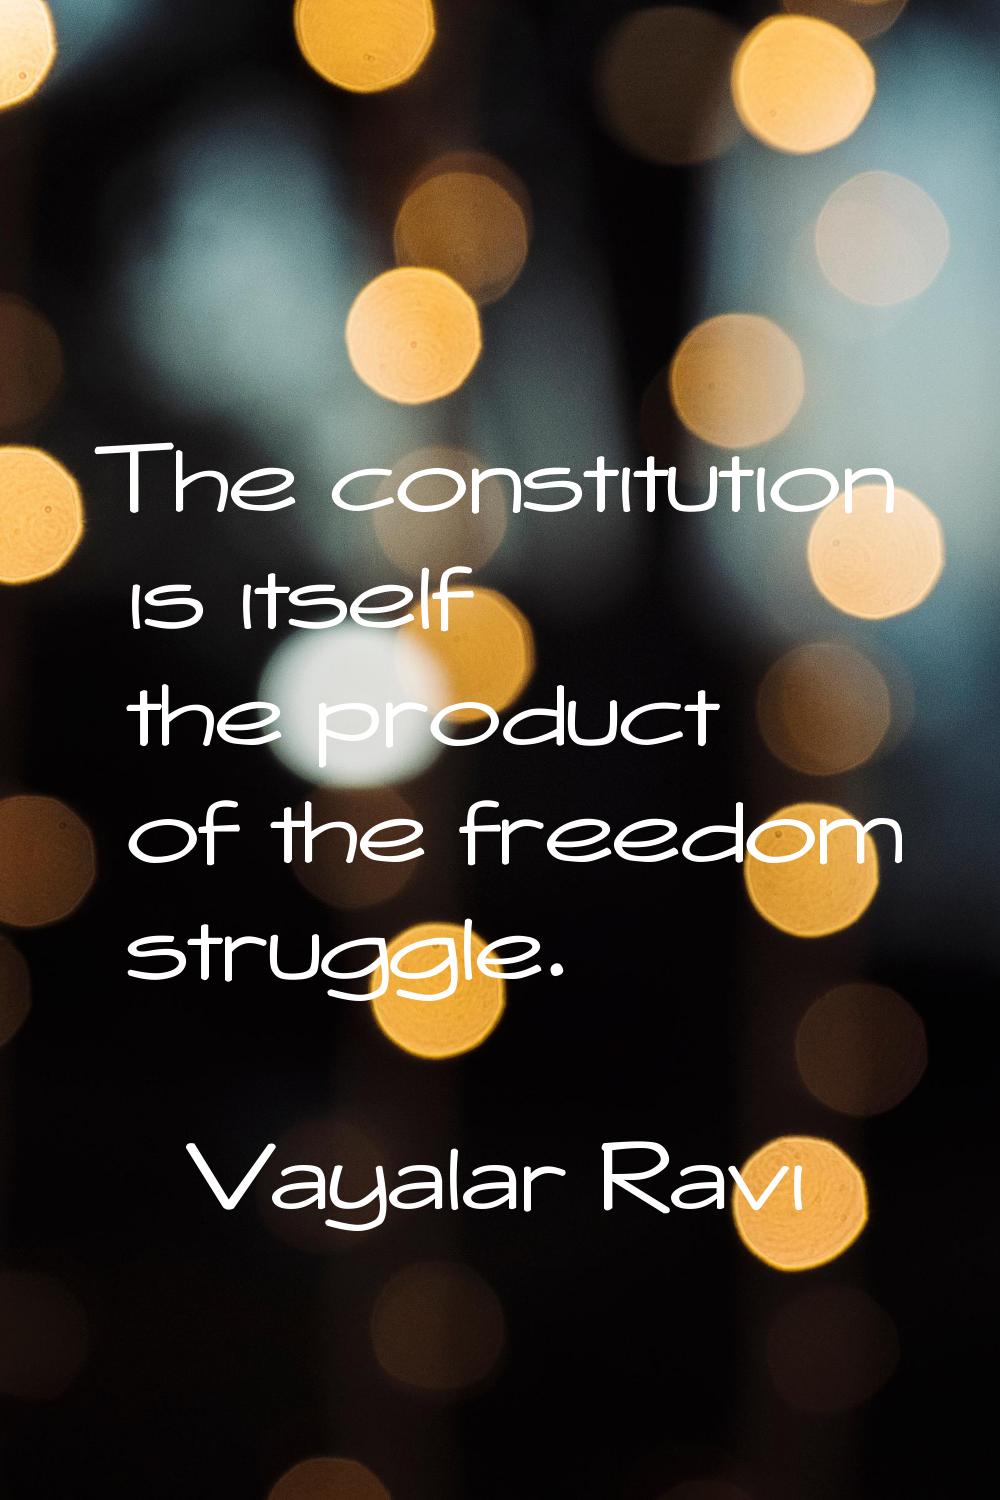 The constitution is itself the product of the freedom struggle.